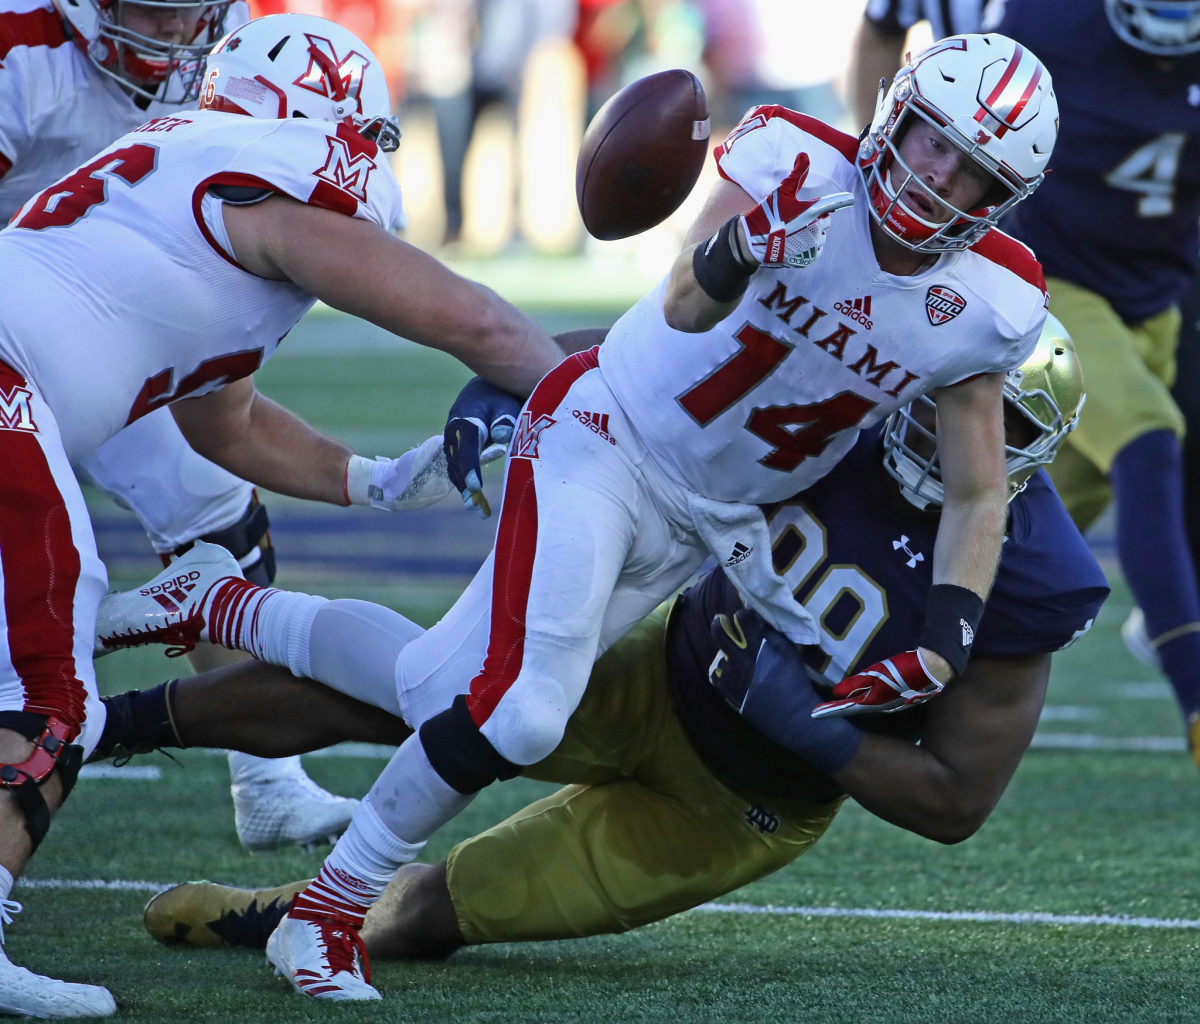 Miami (OH) quarterback Gus Ragland is taken down by Notre Dame's Jerry Tillery.